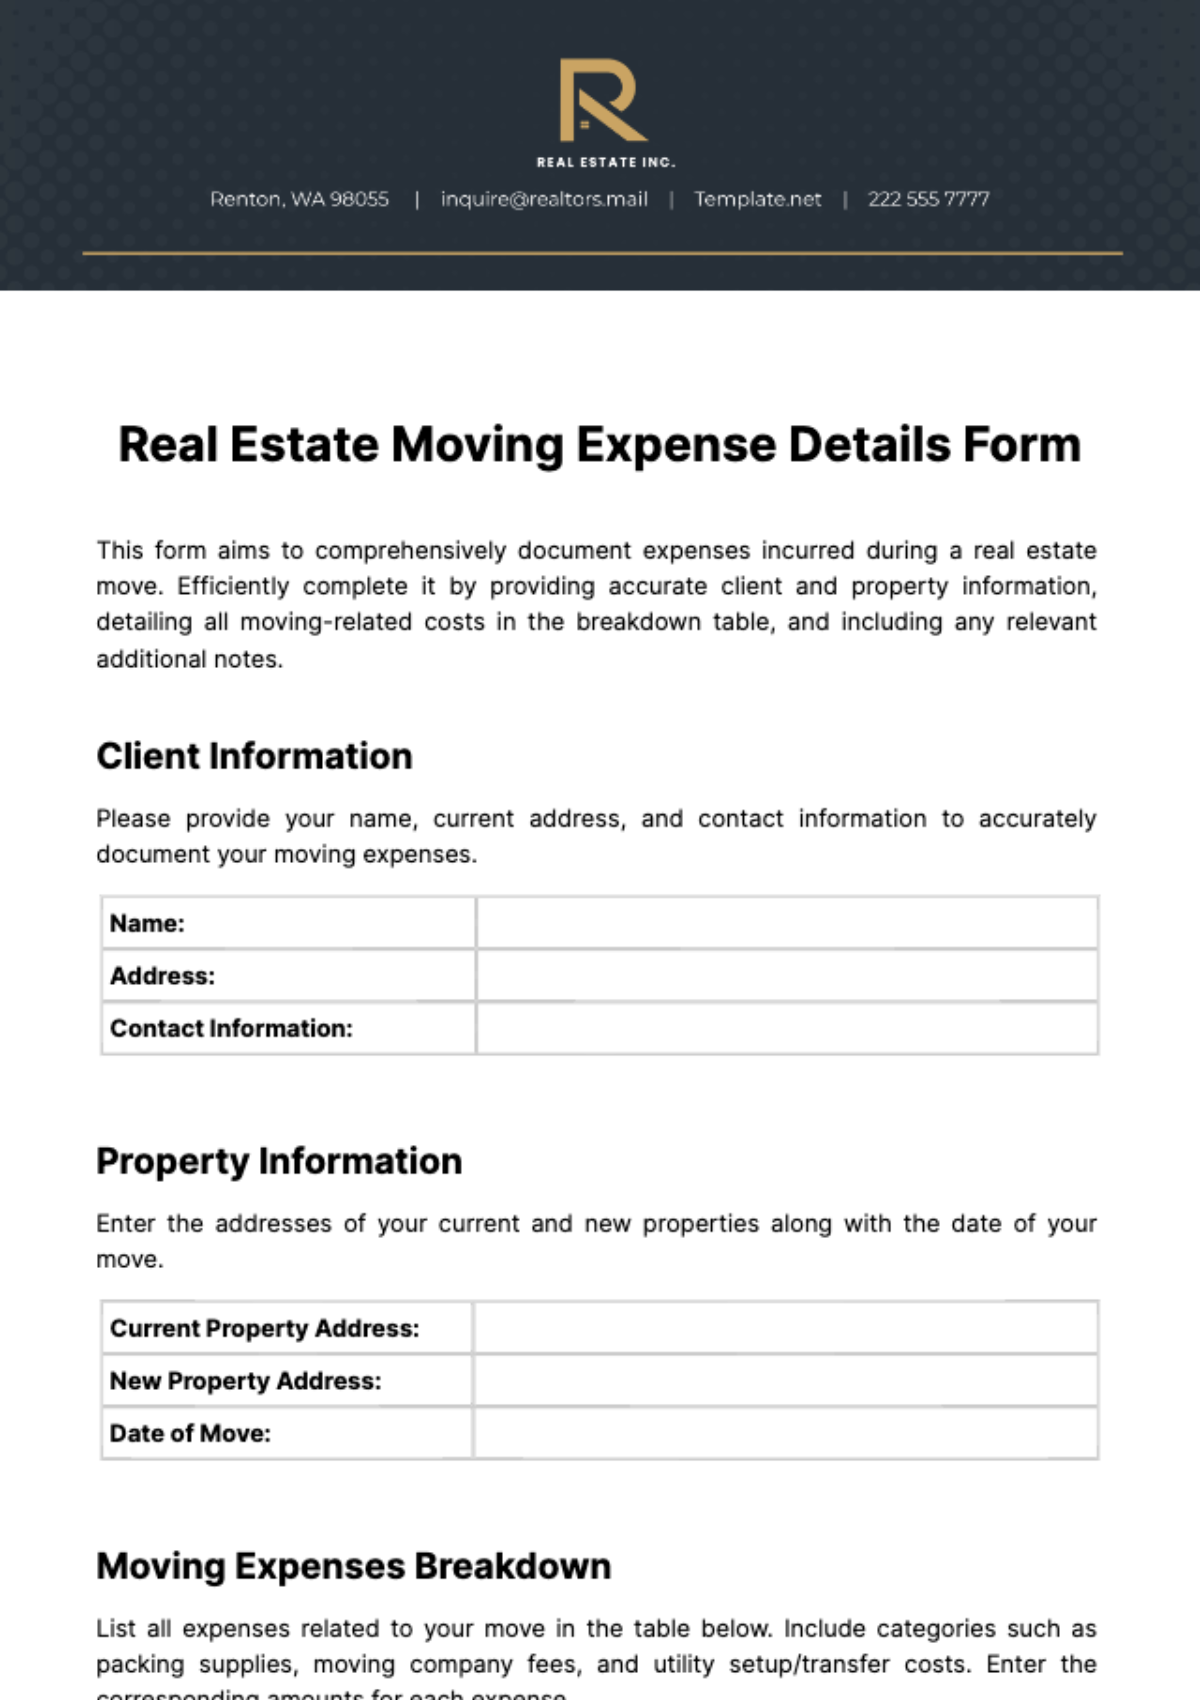 Real Estate Moving Expense Details Form Template